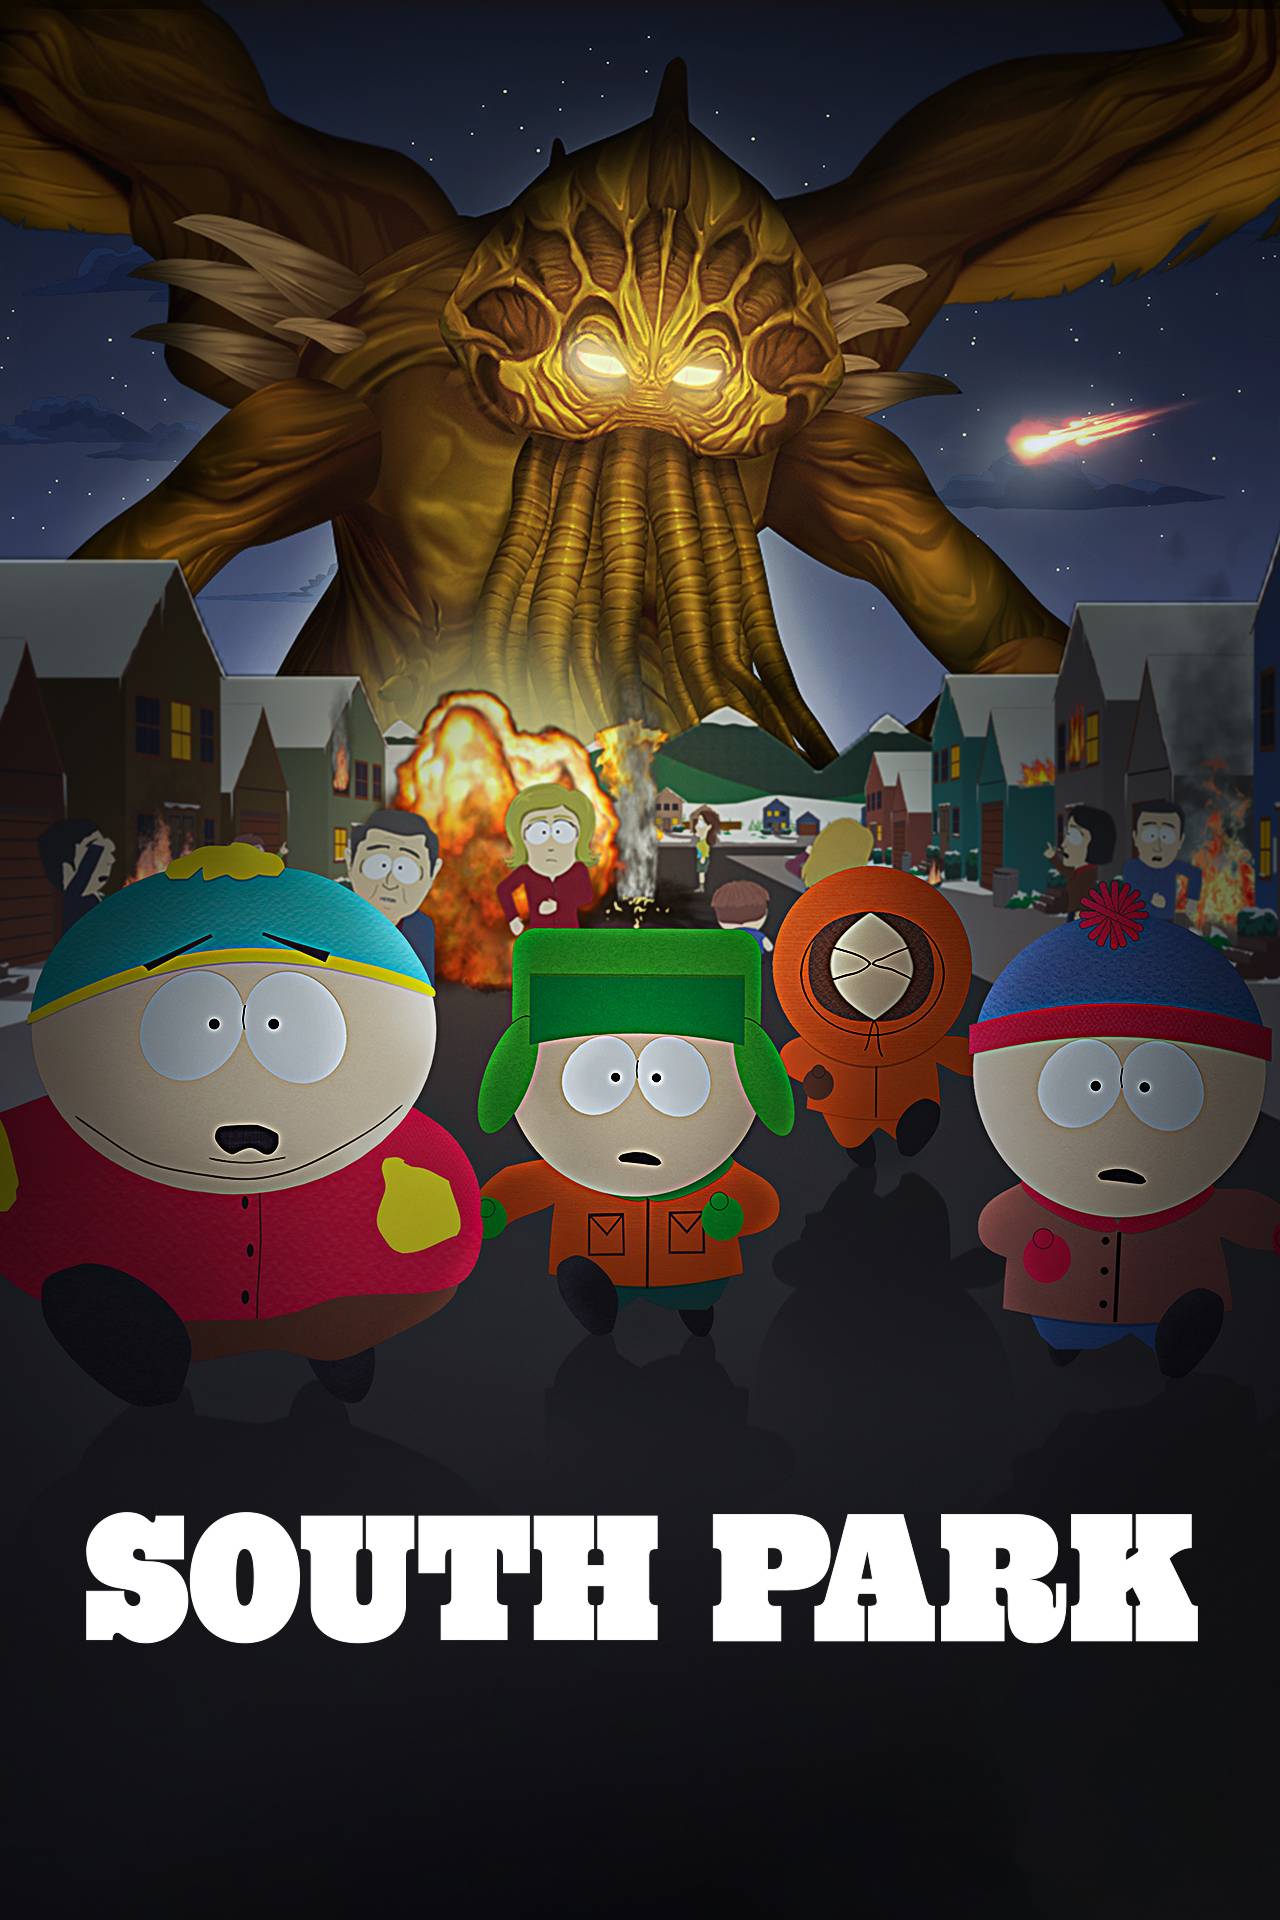 South Park TV Series Comedy Central US